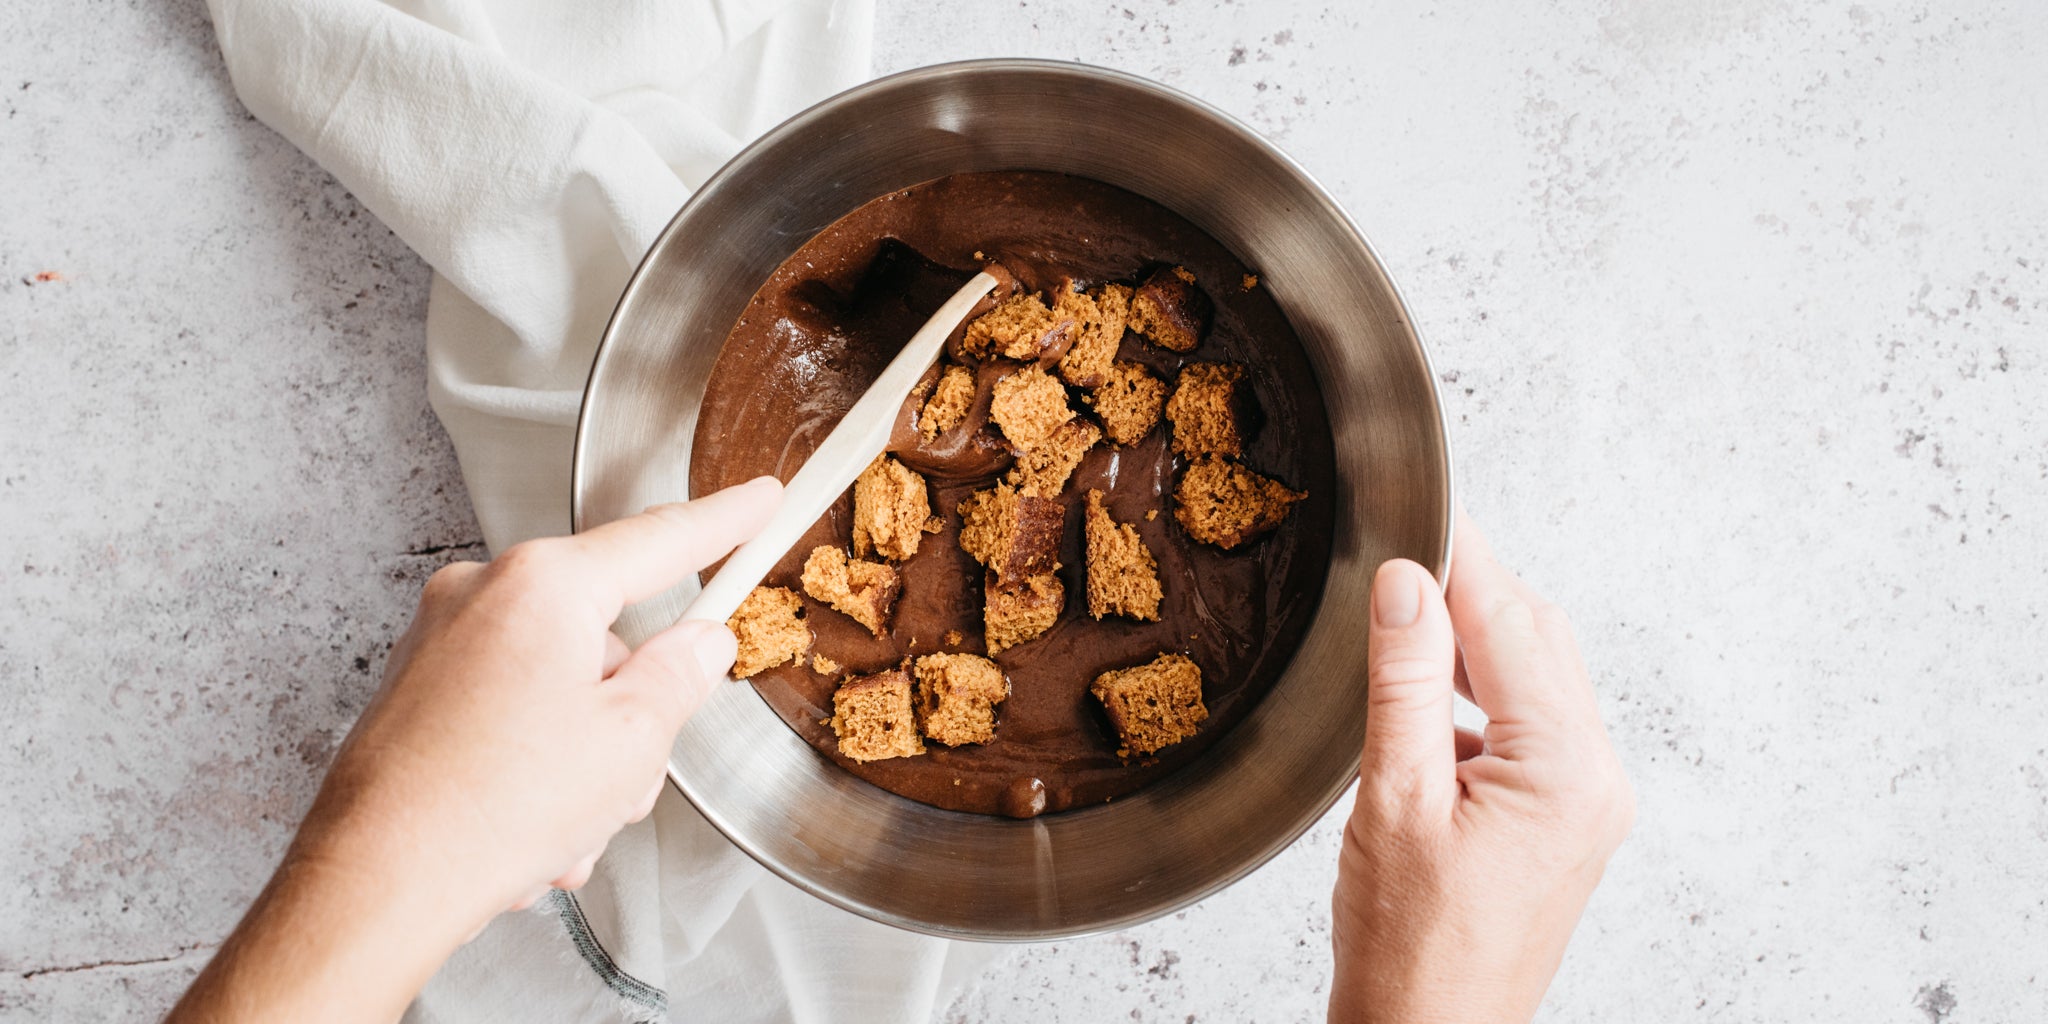 Metal bowl with hands stirring the chocolate mixture with a wooden spoon